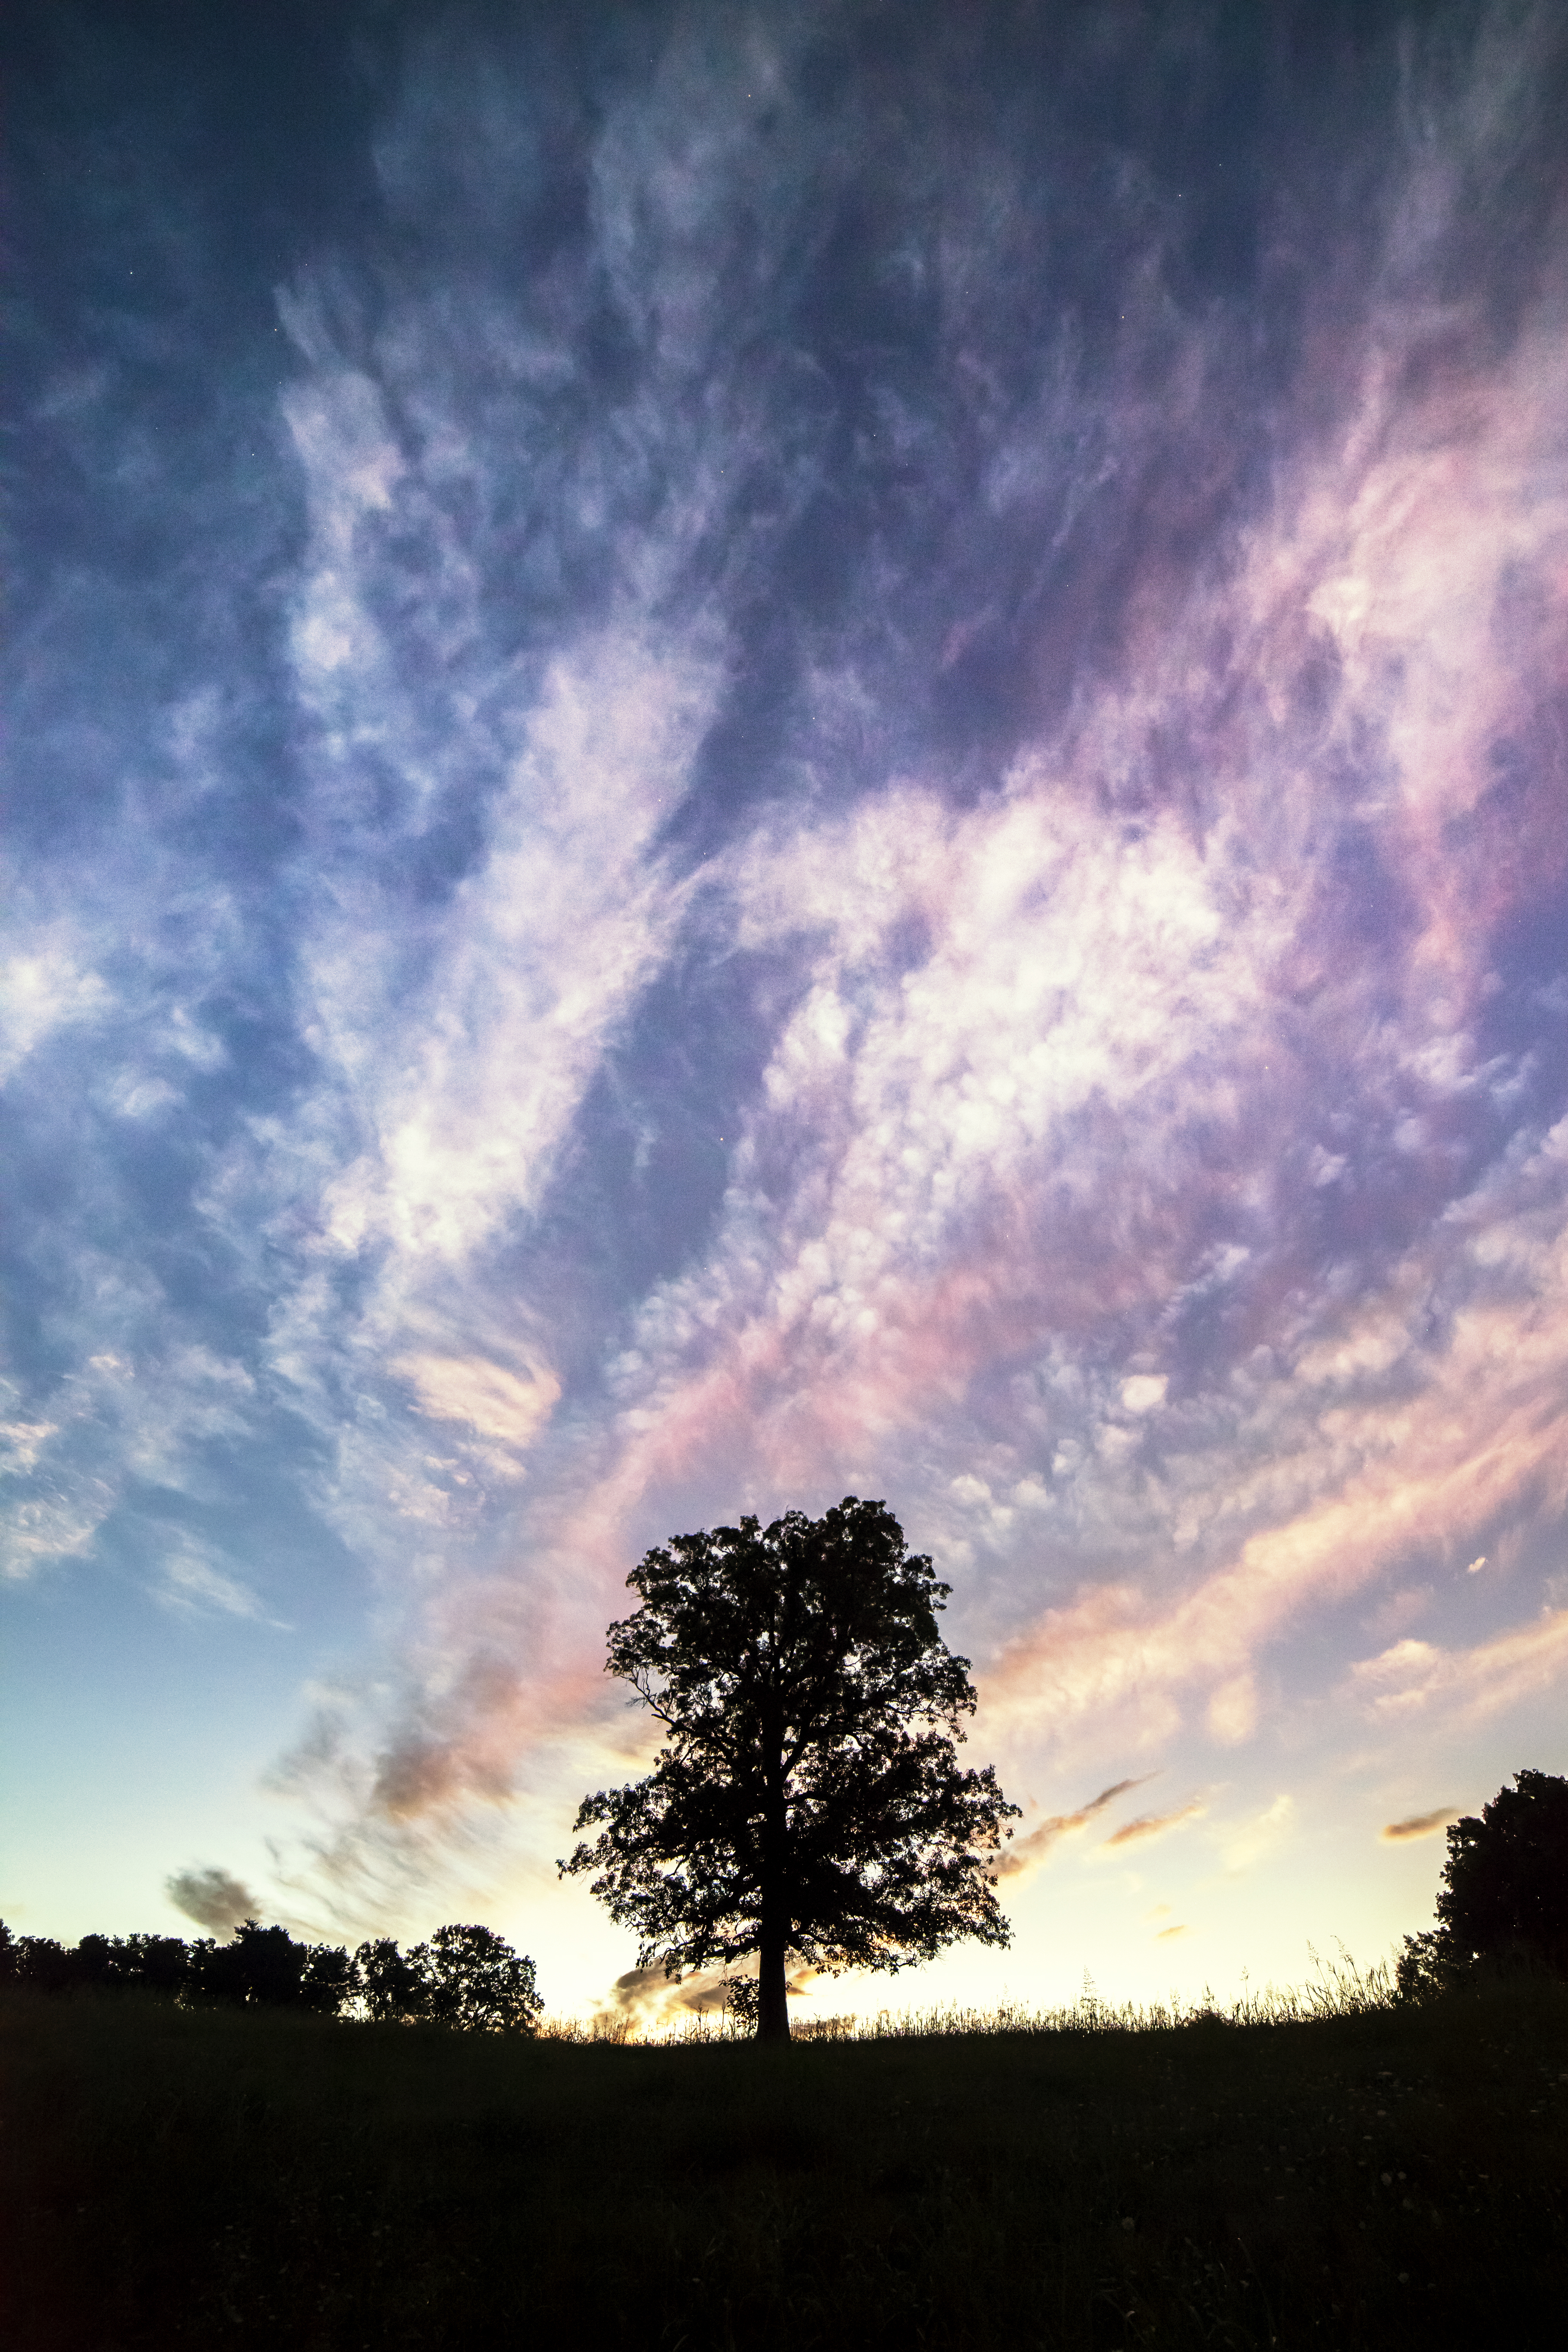 Sunset with sky streaked in dark purple and pink and stars showing over the silhouette of a tree.